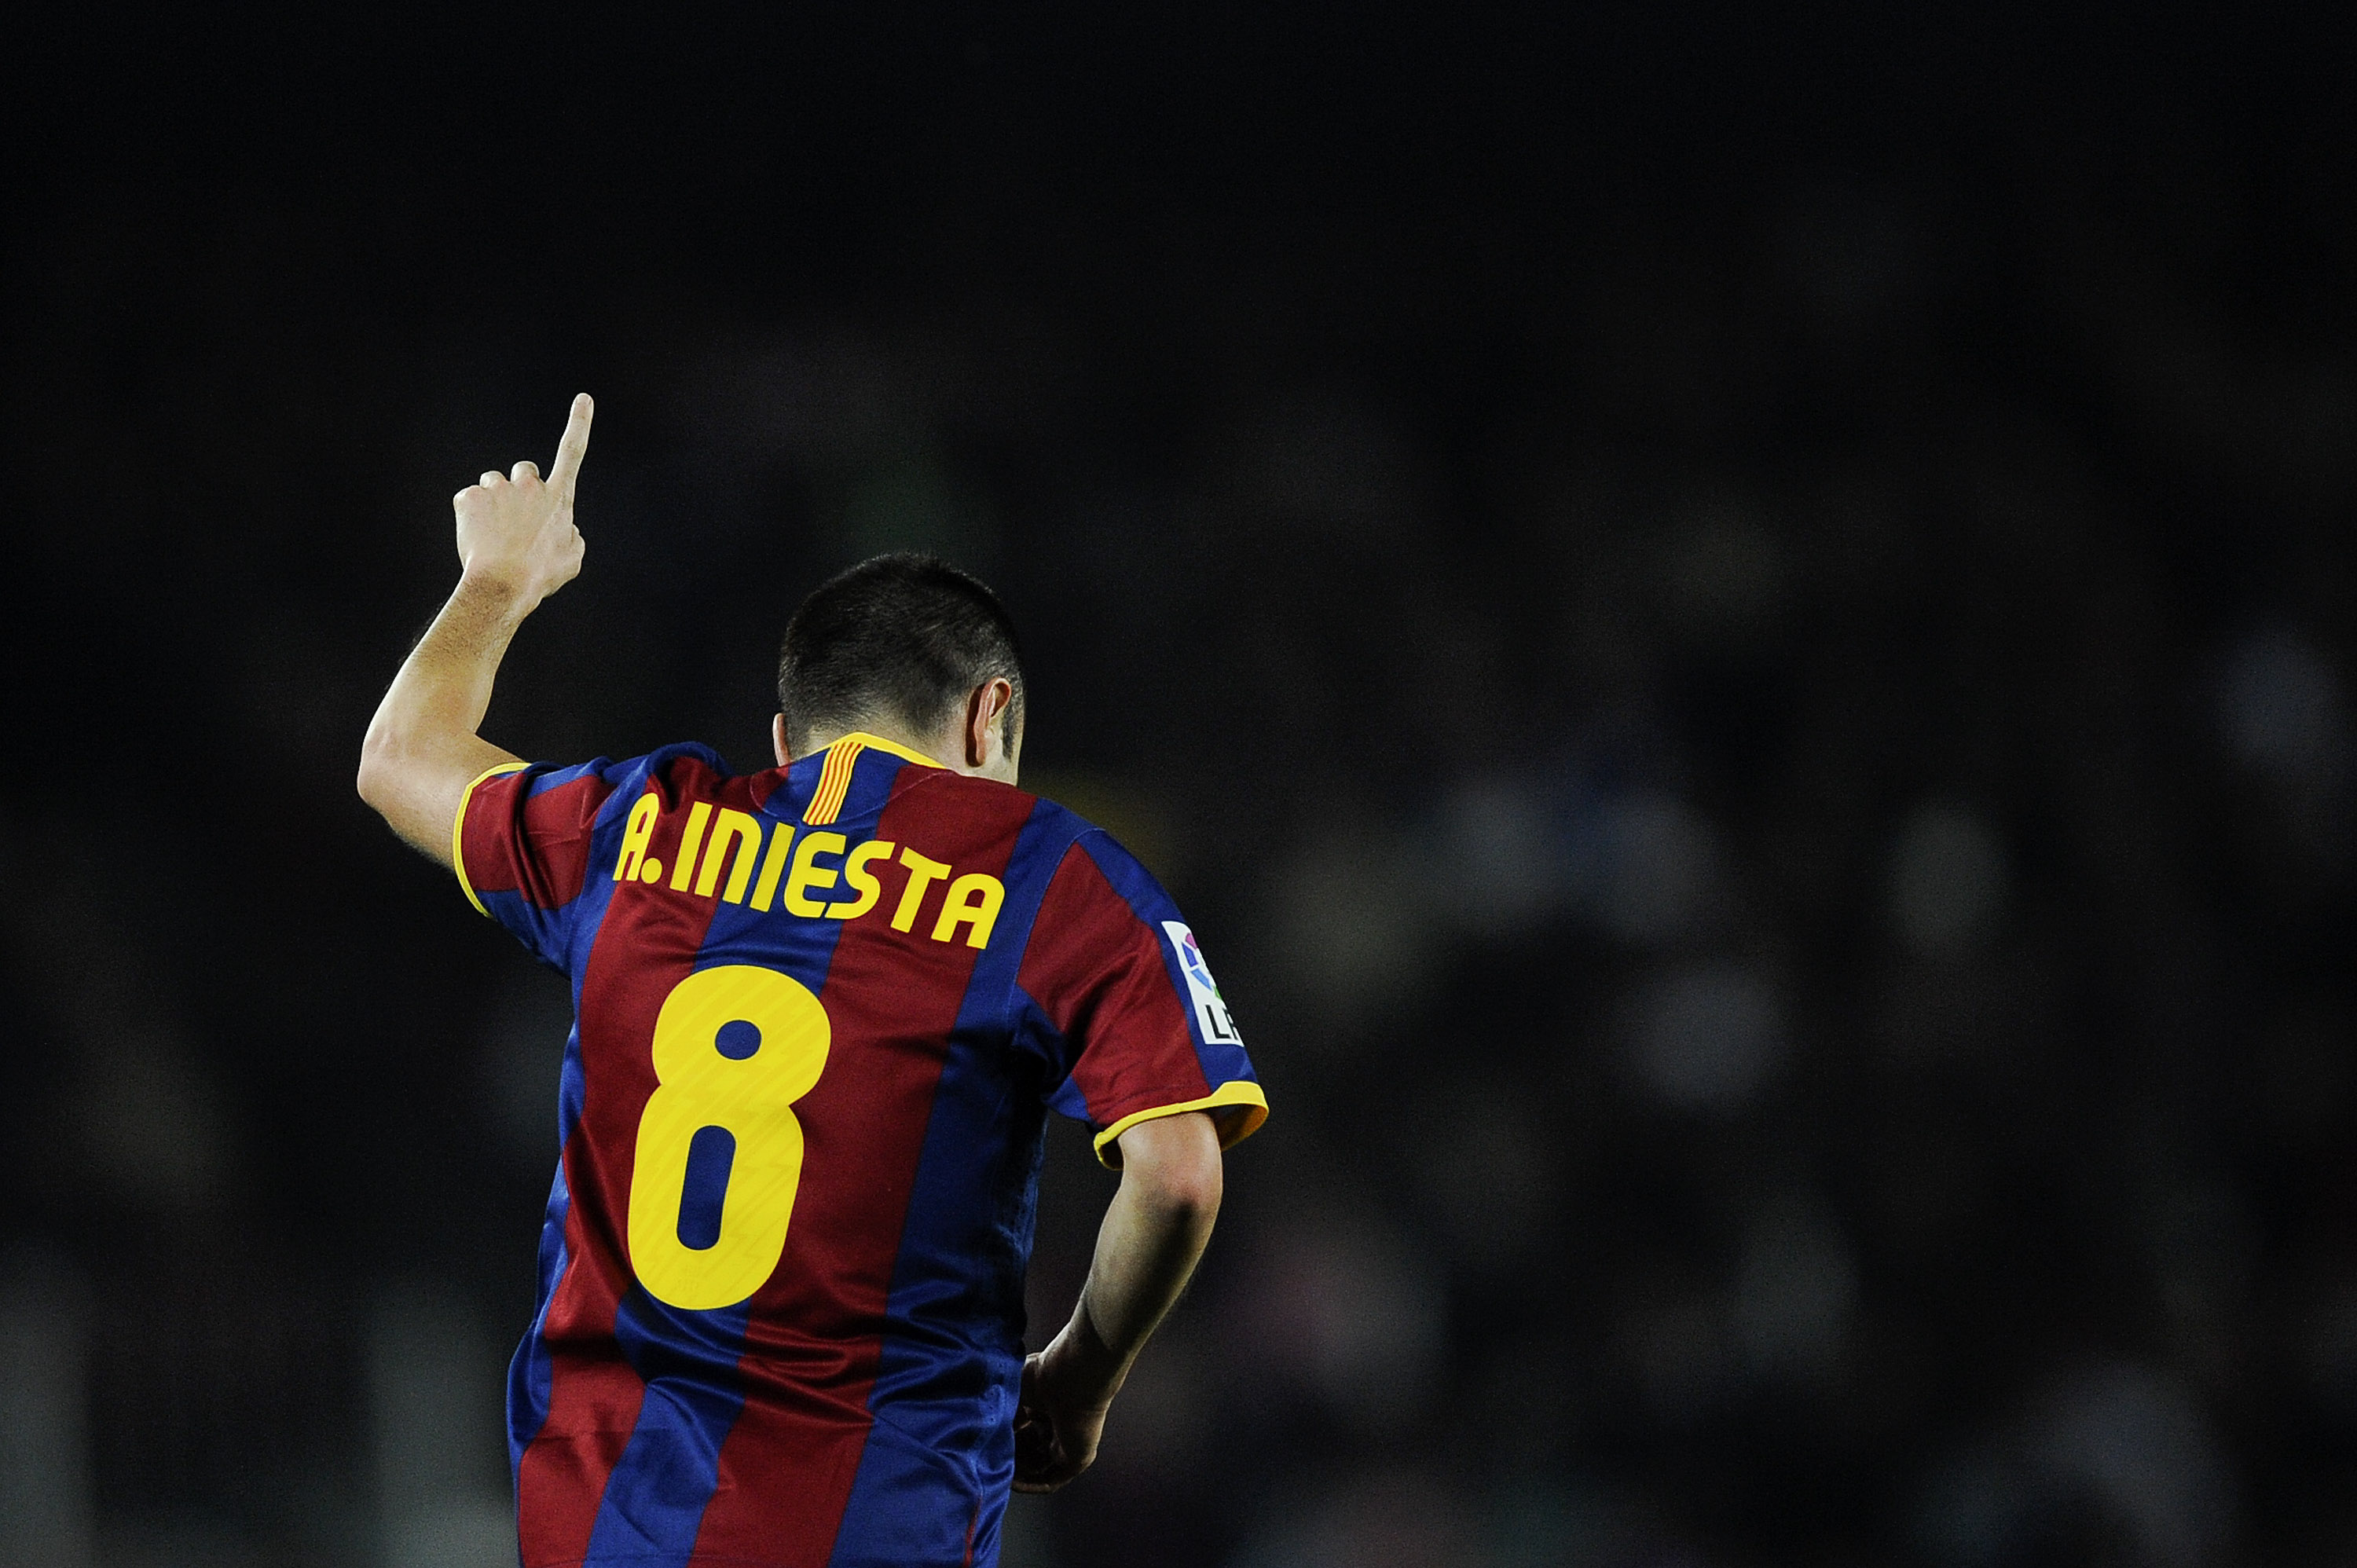 BARCELONA, SPAIN - DECEMBER 12:  Andres Iniesta of Barcelona celebrates after scoring his goal during the La Liga match between Barcelona and Real Sociedad at Camp Nou Stadium on December 12, 2010 in Barcelona, Spain. Barcelona won 5-0.  (Photo by David R